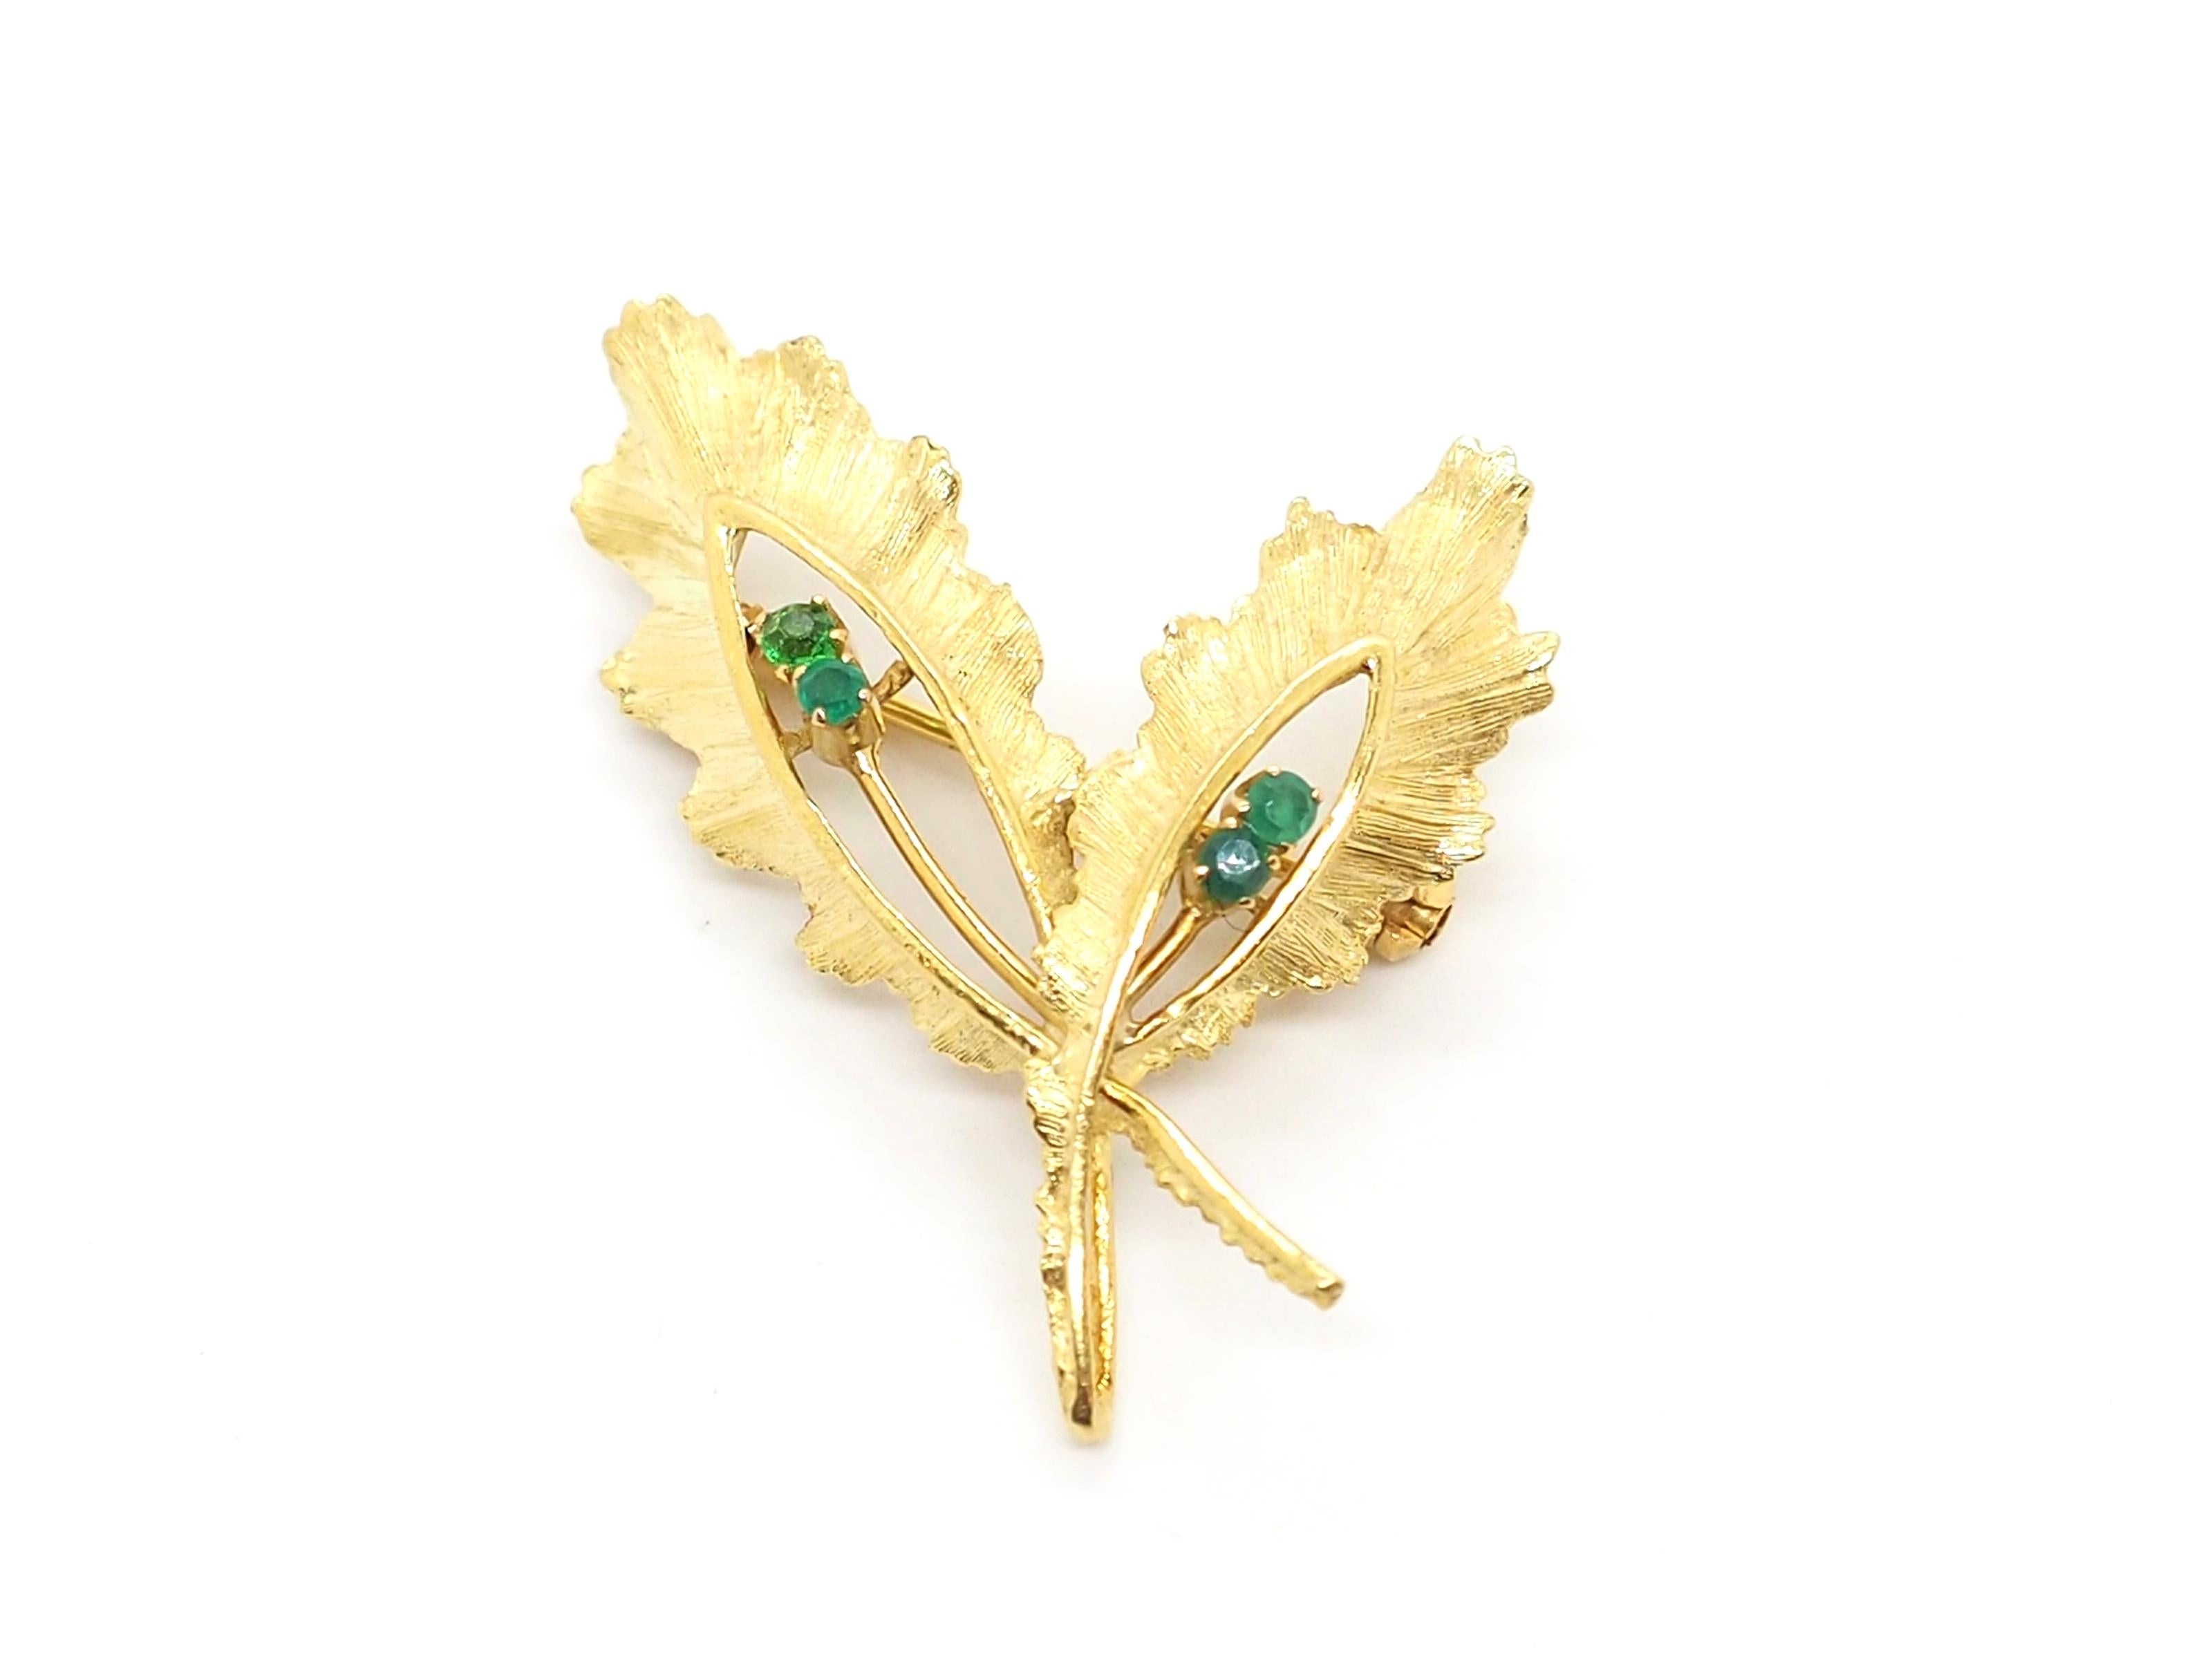 An elegant vintage brooch crafted in 18K yellow gold. It features 4 emeralds. The designs of this item was inspired by nature. And this theme was very popular during the 50s and 60s, when the brooch was created:

Total weight: 5.5